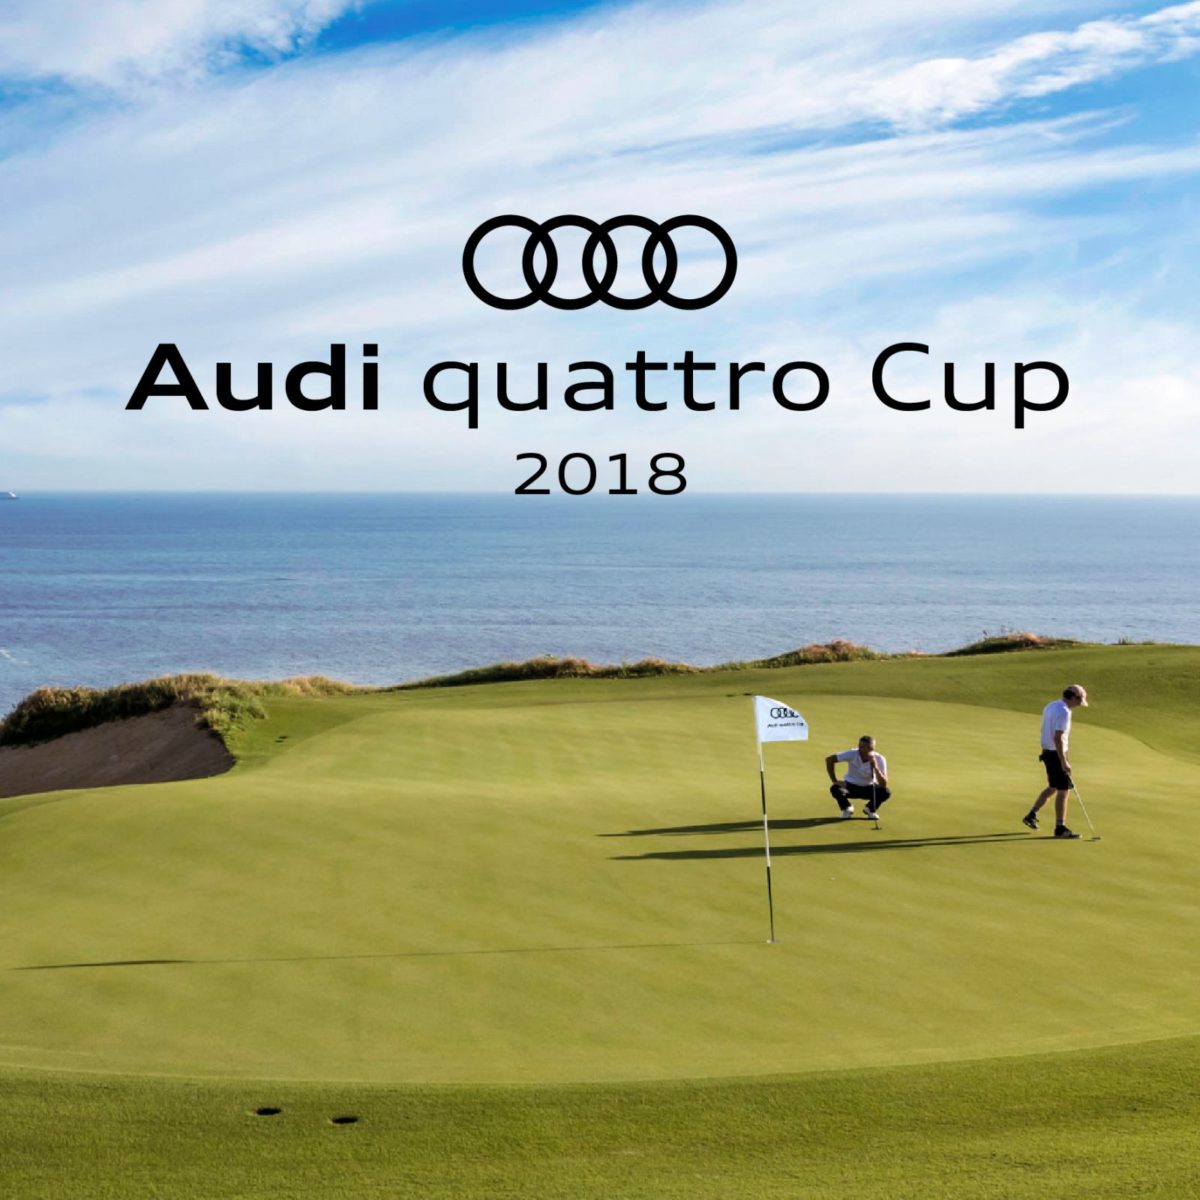 th Edition of Audi quattro Cup in India Details Announced